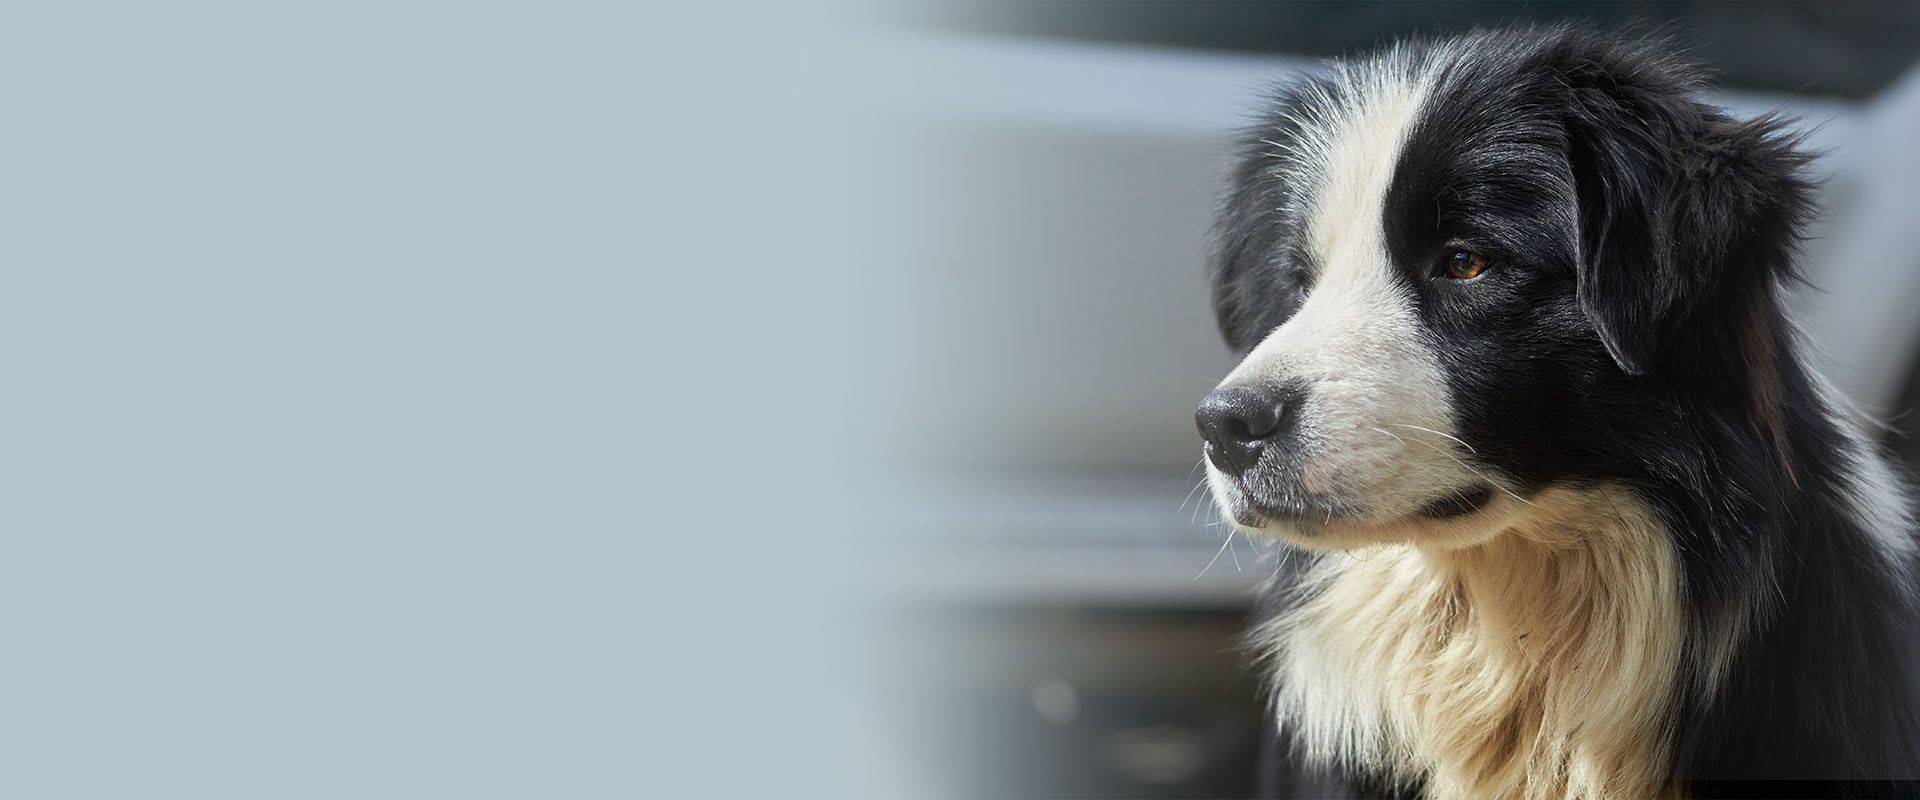 Close-up shot of a cute Border Collie dog